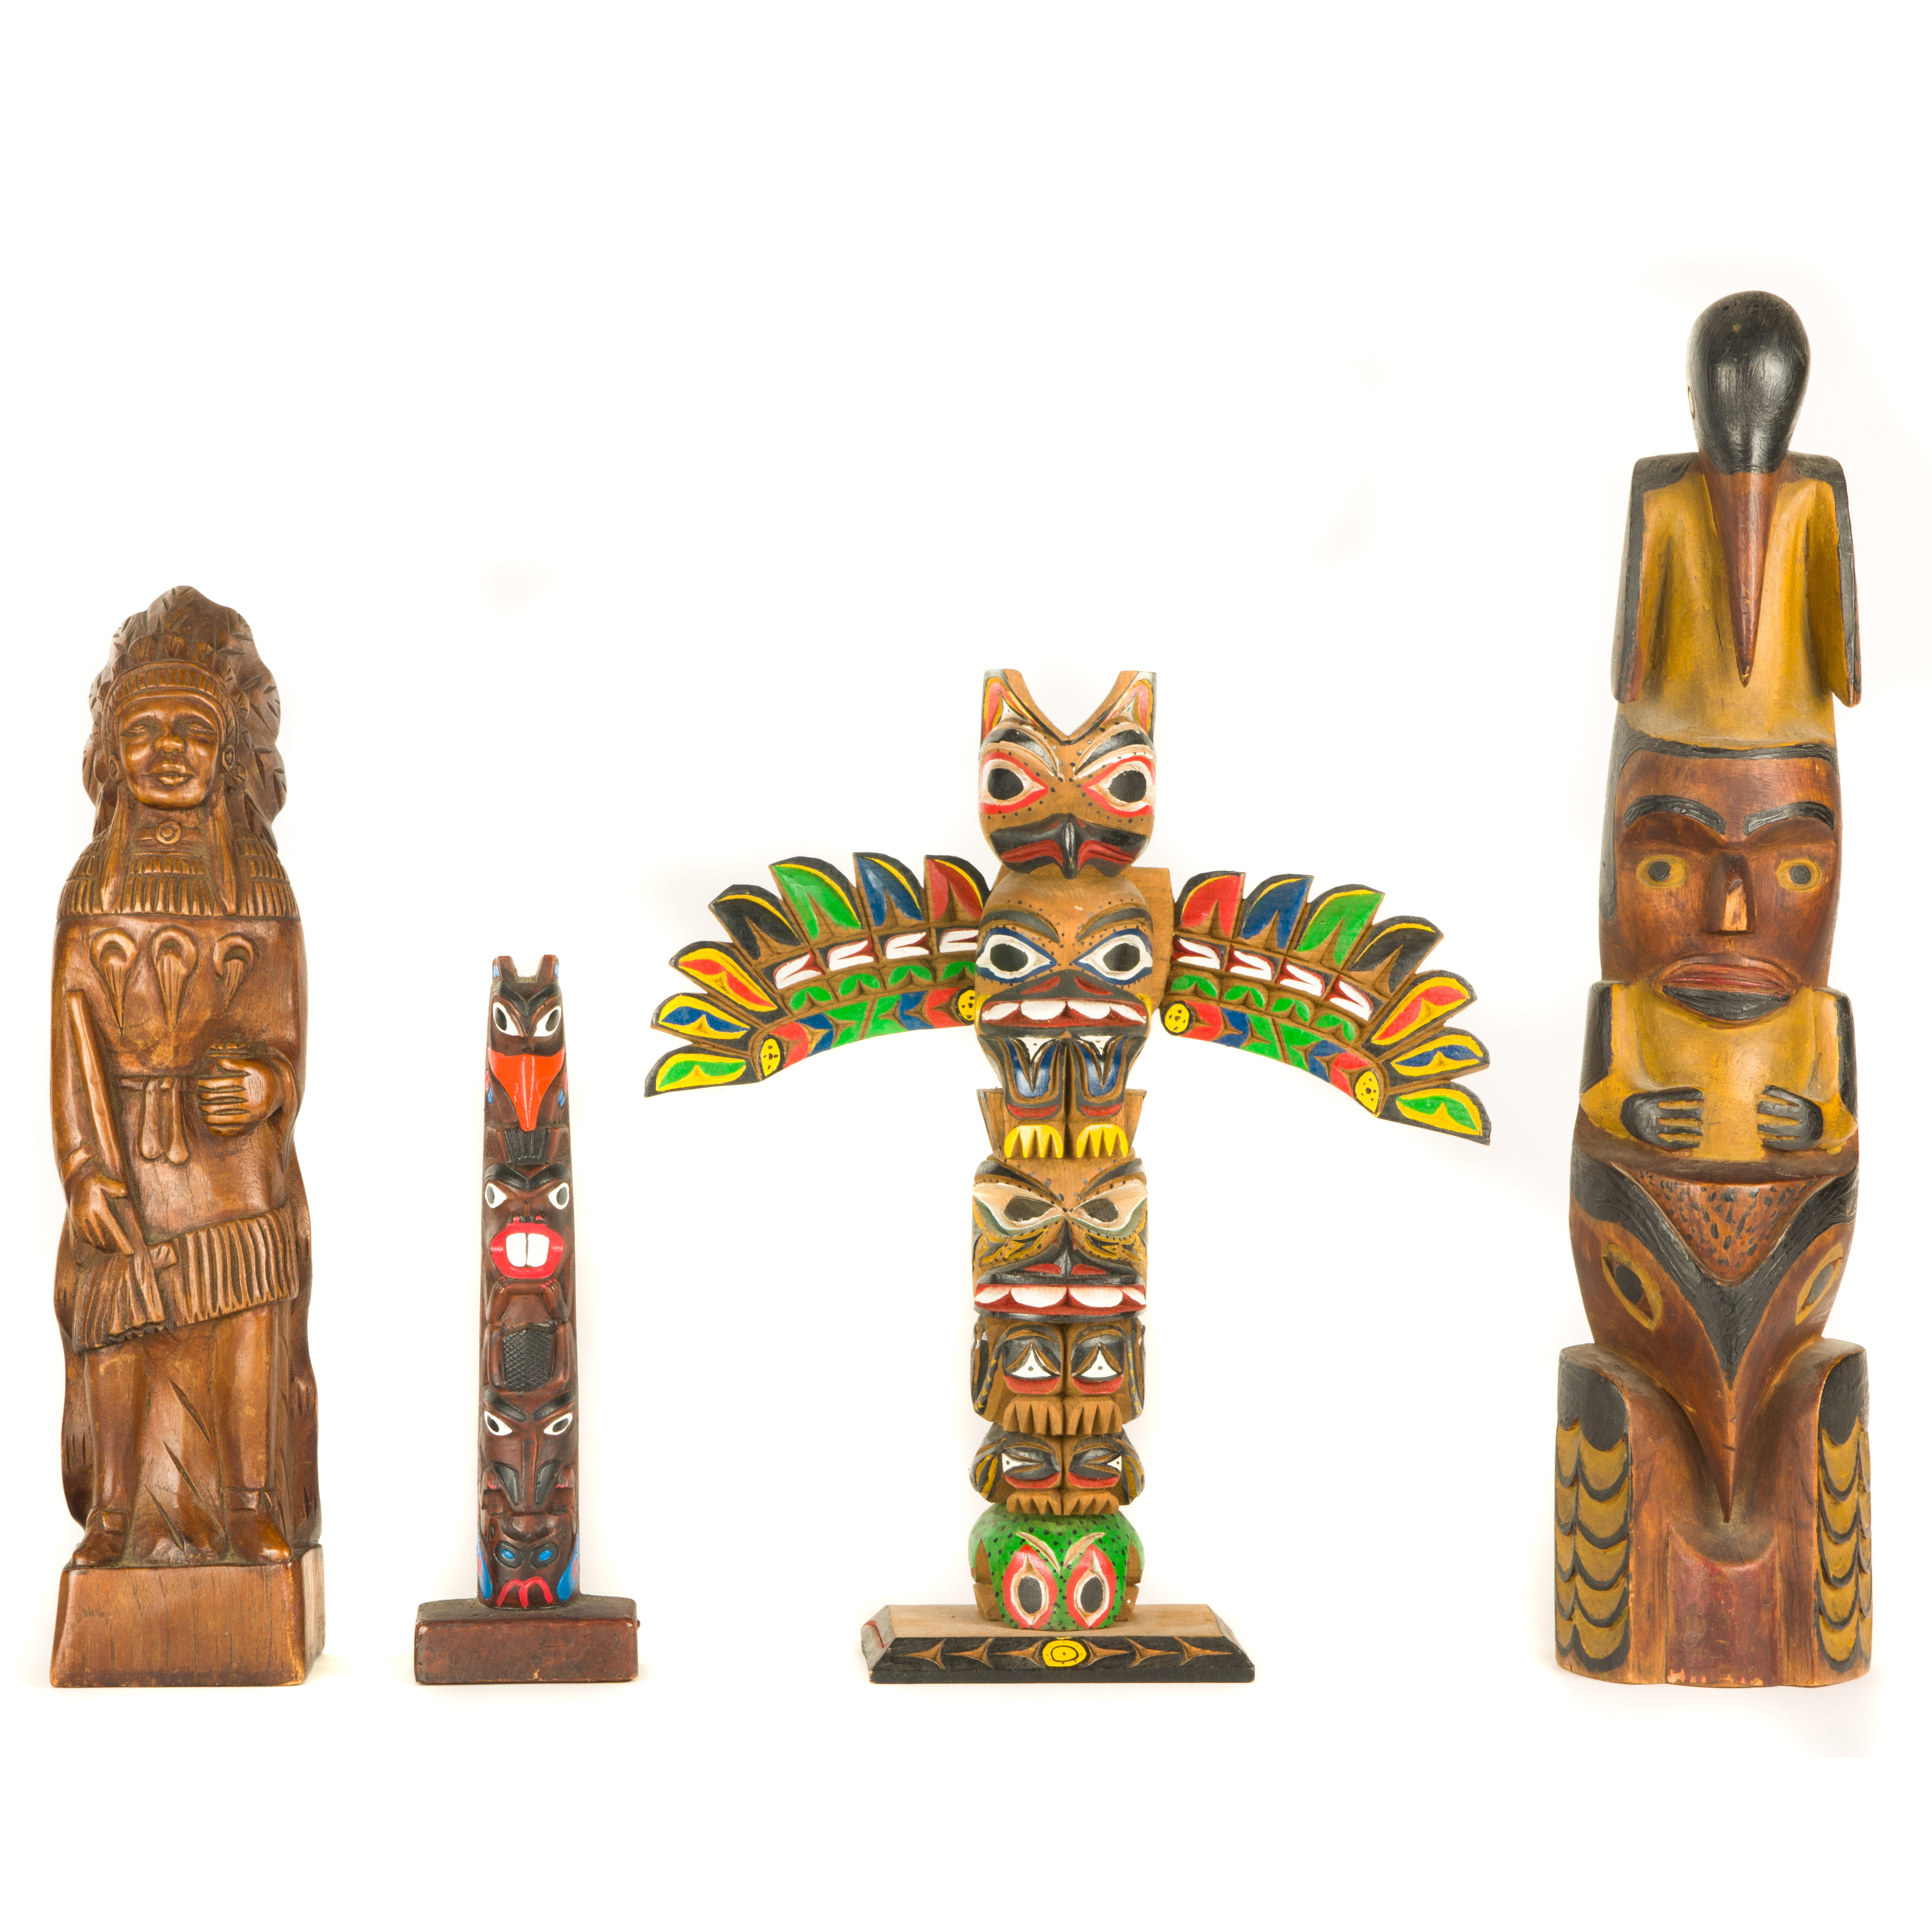  LOT OF 4 NATIVE AMERICAN TOTEM 3a3443